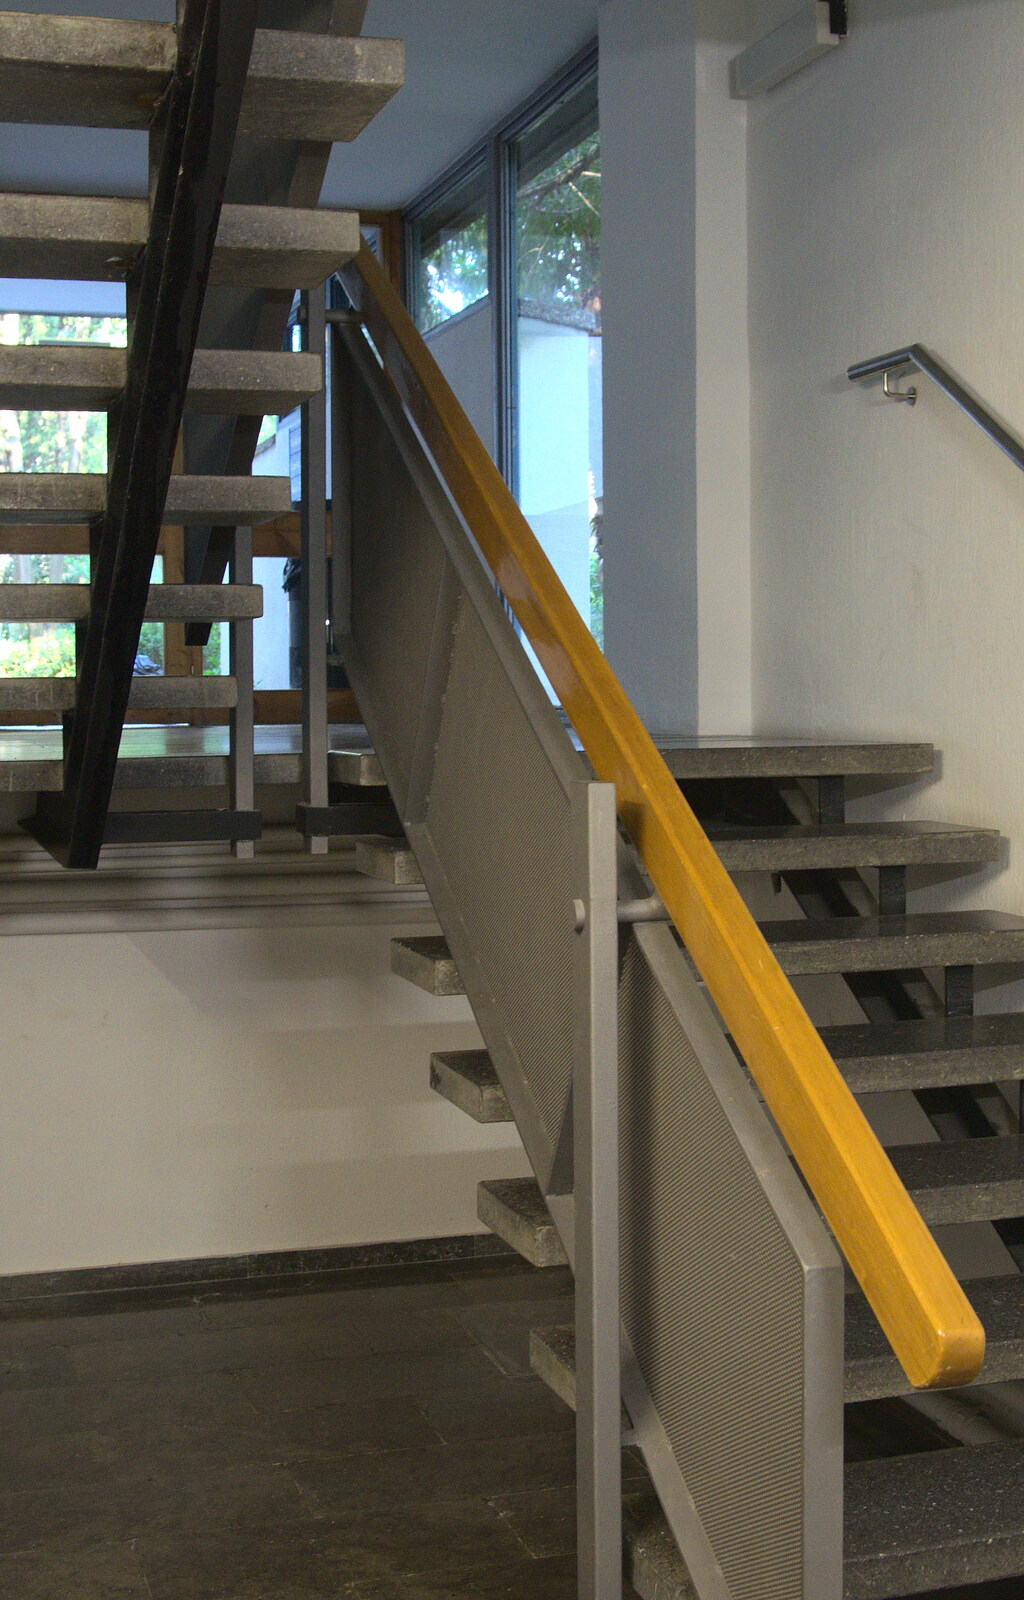 Industrial staircase from The Open Education Challenge, Barcelona, Catalonia - 13th July 2014